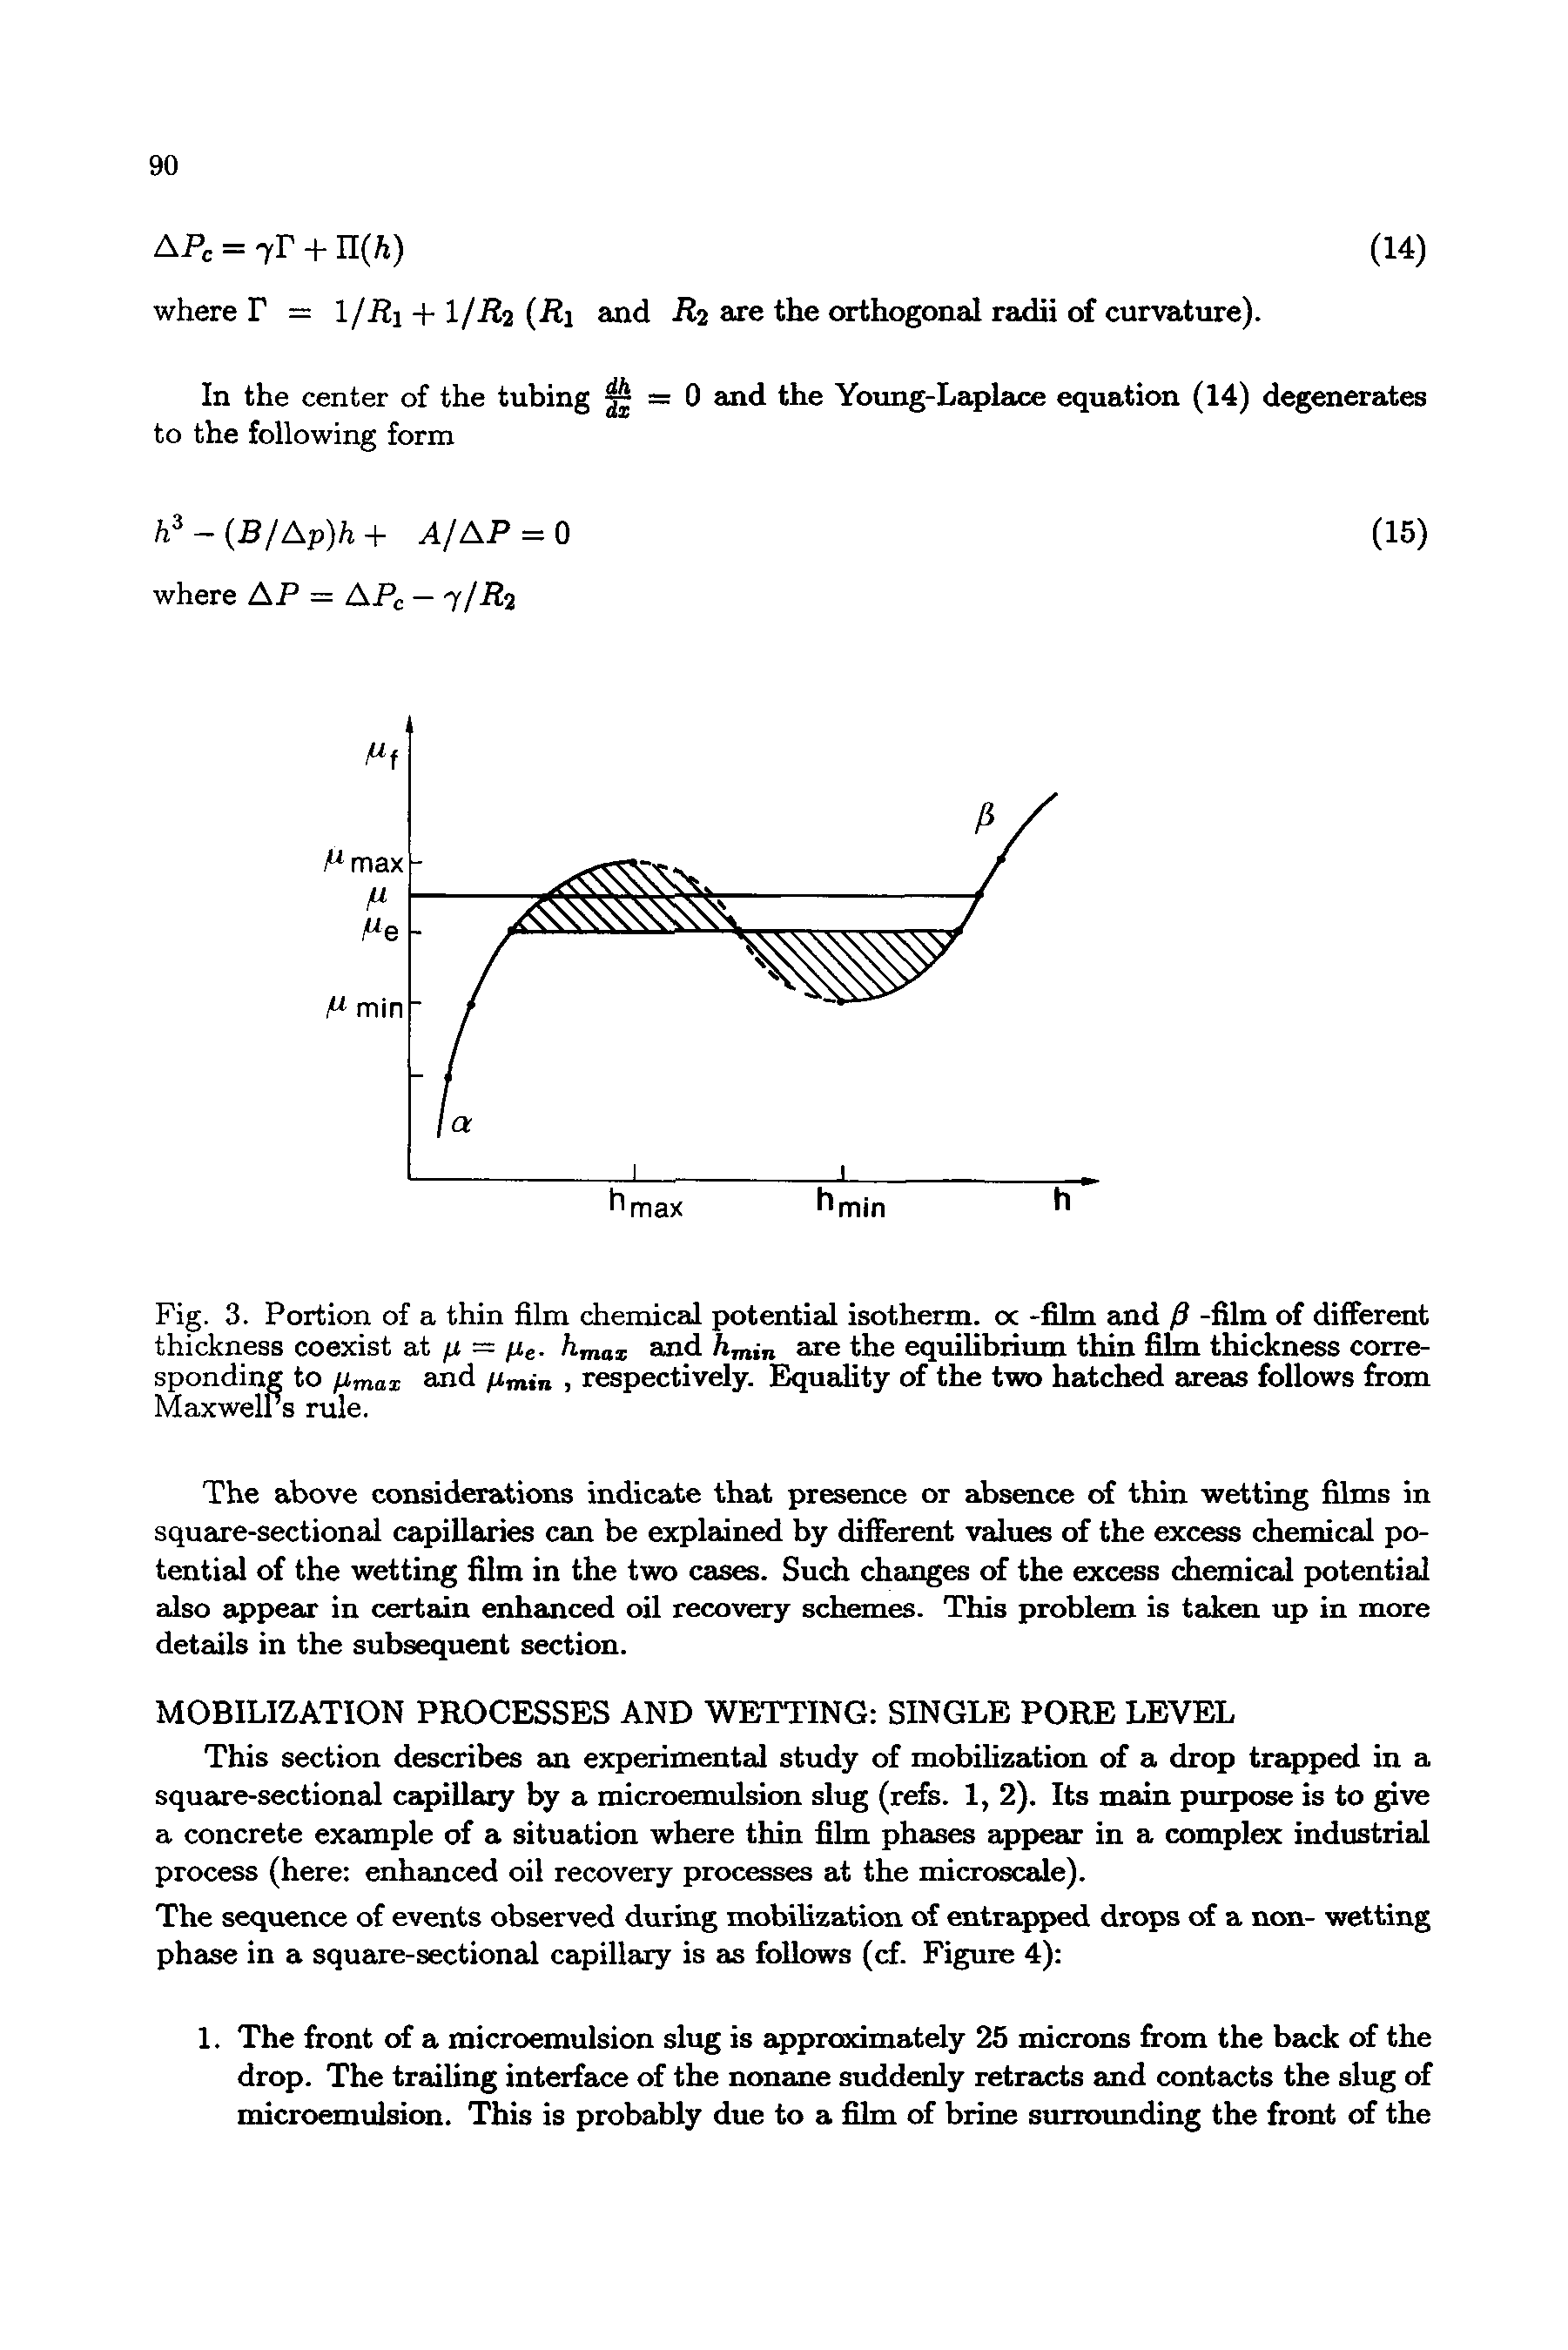 Fig. 3. Portion of a thin film chemical potential isotherm, oc -film and -film of different thickness coexist at // = /ie. hmax and hmin are the equilibrium thin film thickness corresponding to pmax and ptnin, respectively. Equality of the two hatched areas follows from Maxwell s rule.